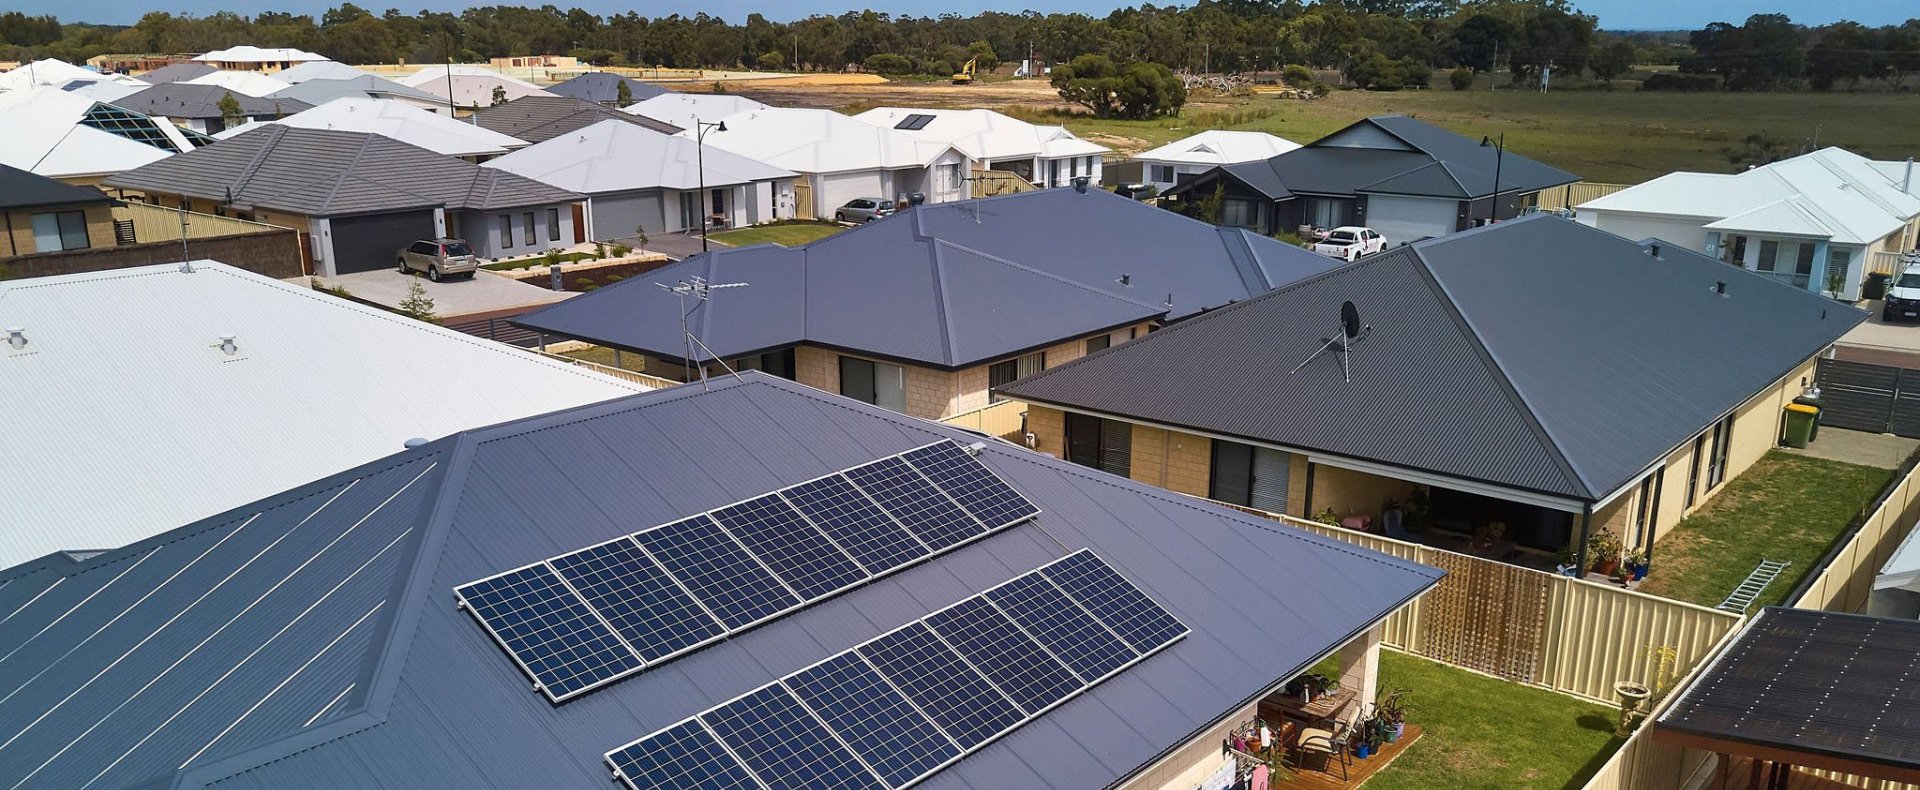 neighbourhood houses with solar panels on their roofs